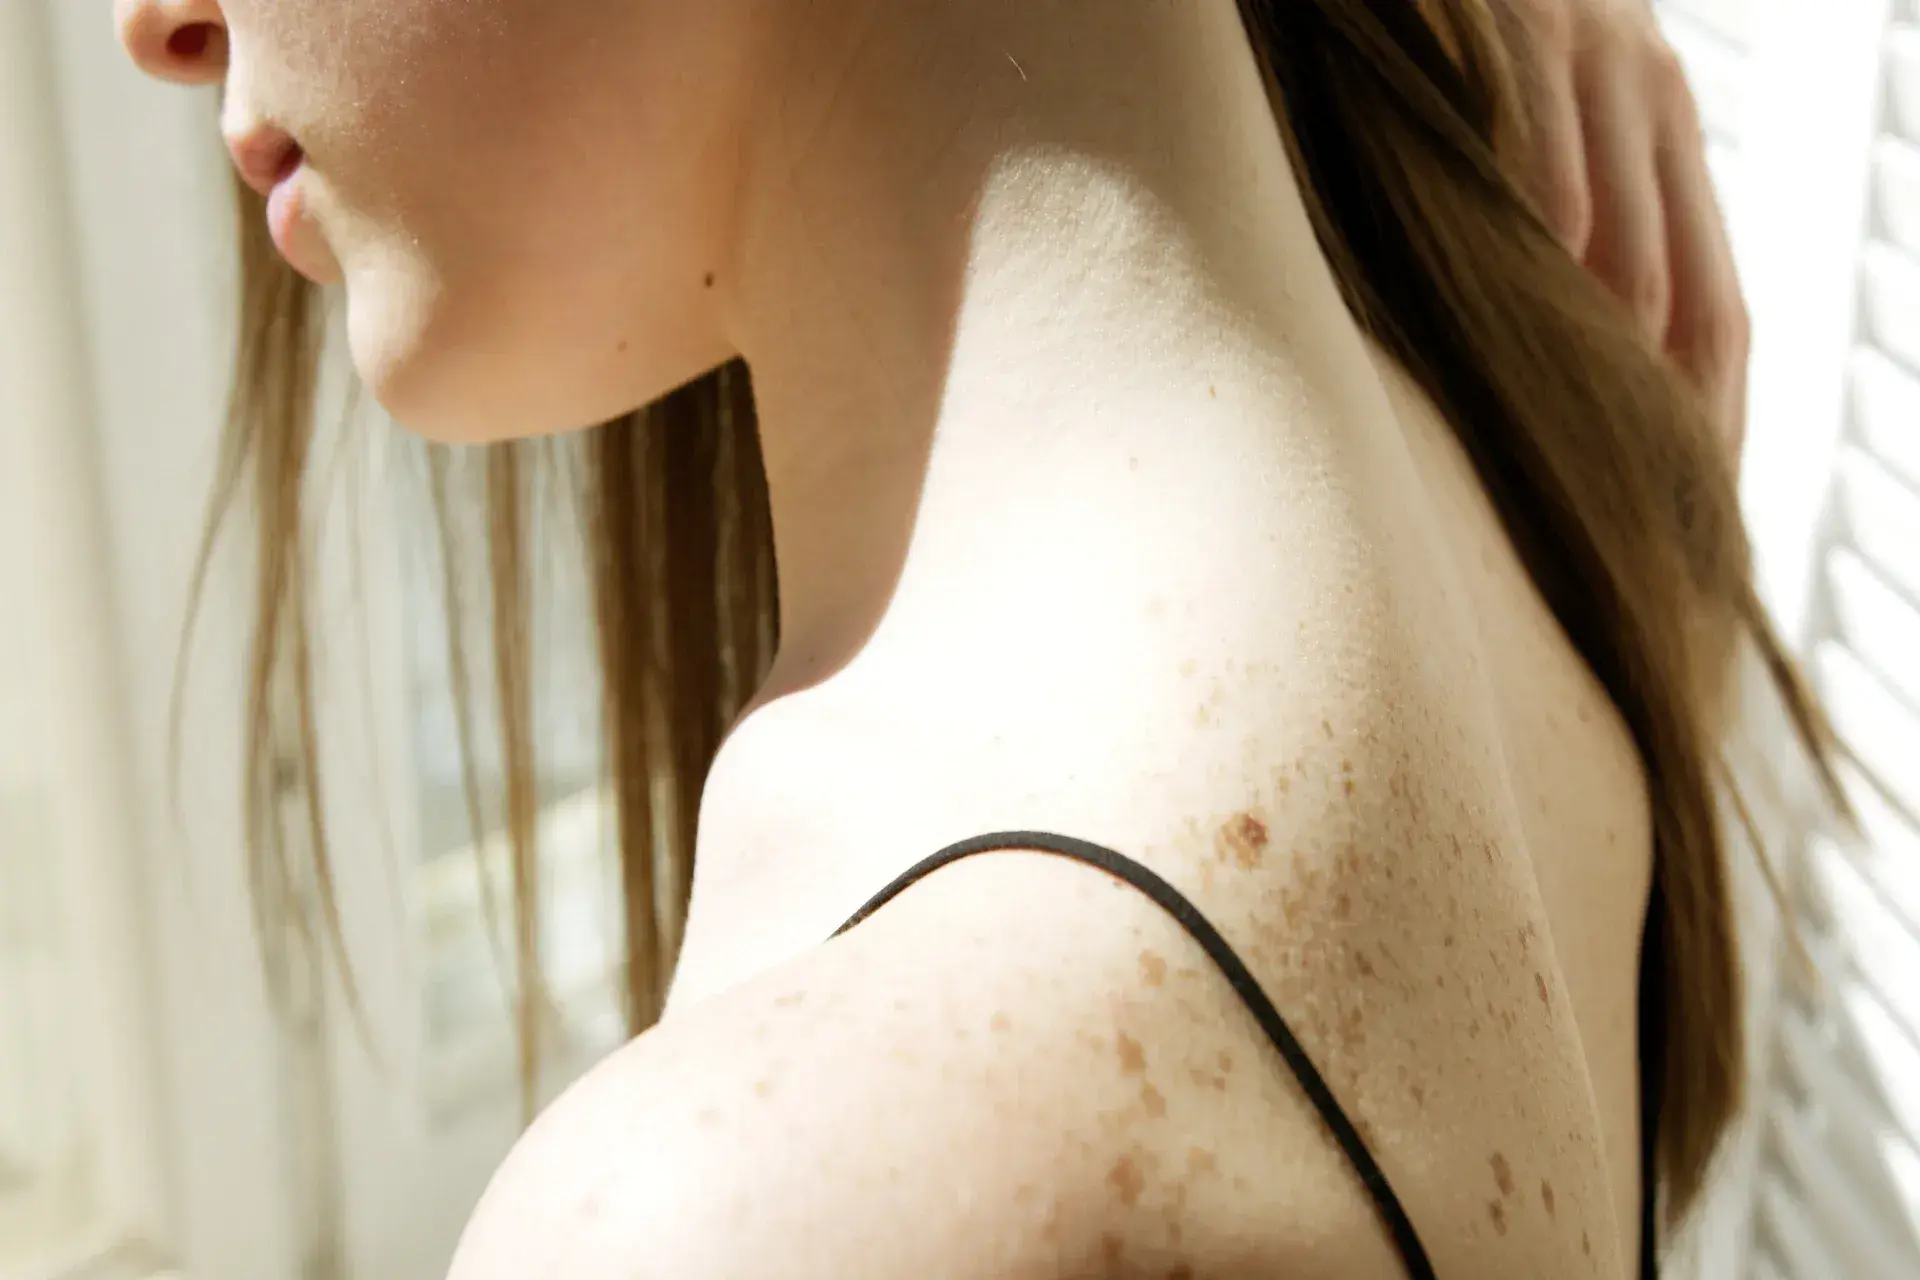  Delicate thing: taking care of the skin of the neck, Photo 2744